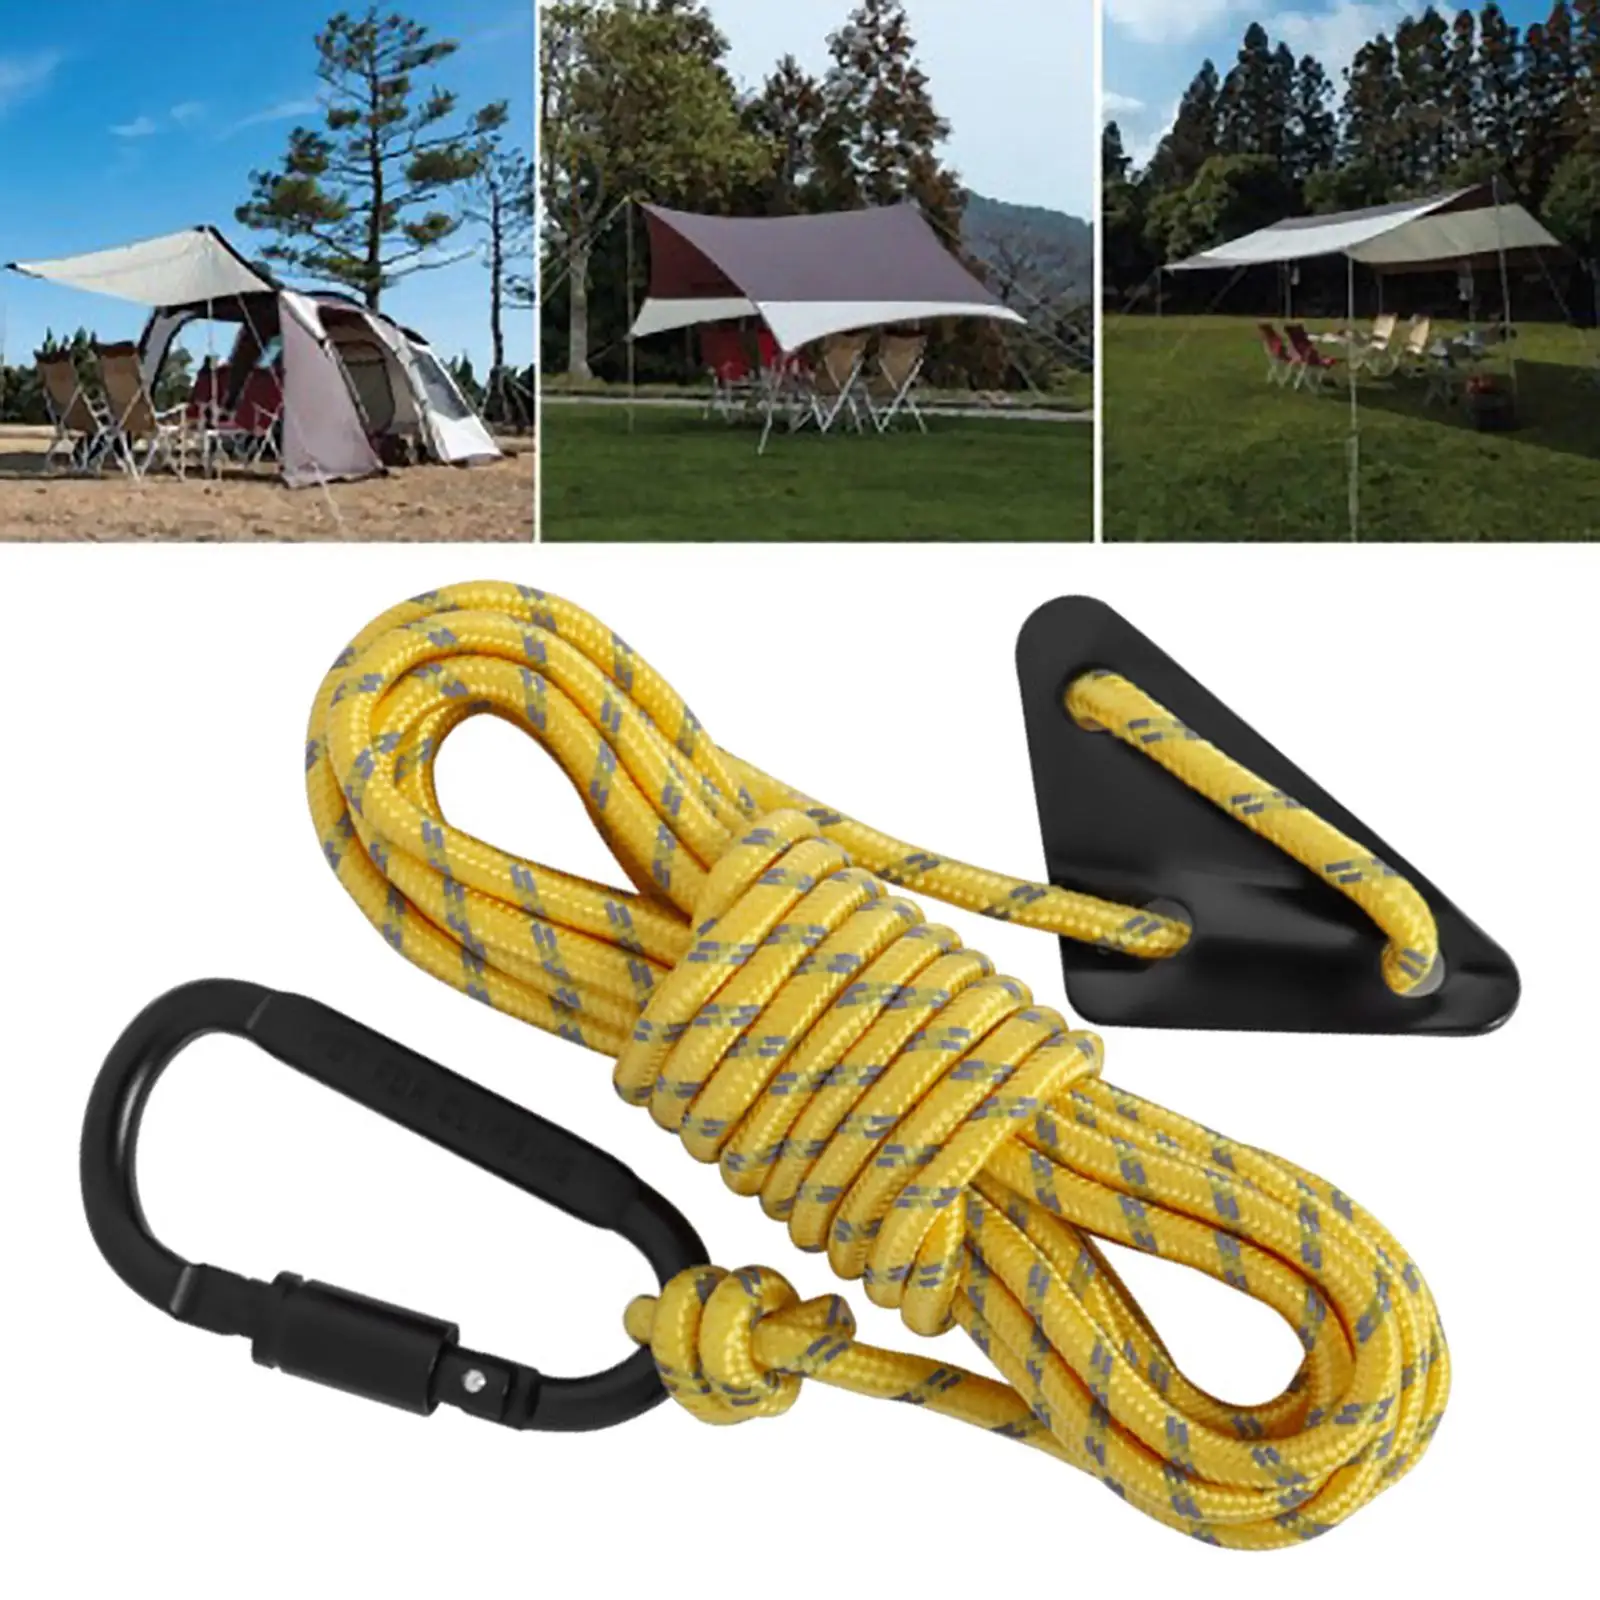 Guyline Tent Rope Reflective with Rope Tensioner and Carabiner, Tent Cord for